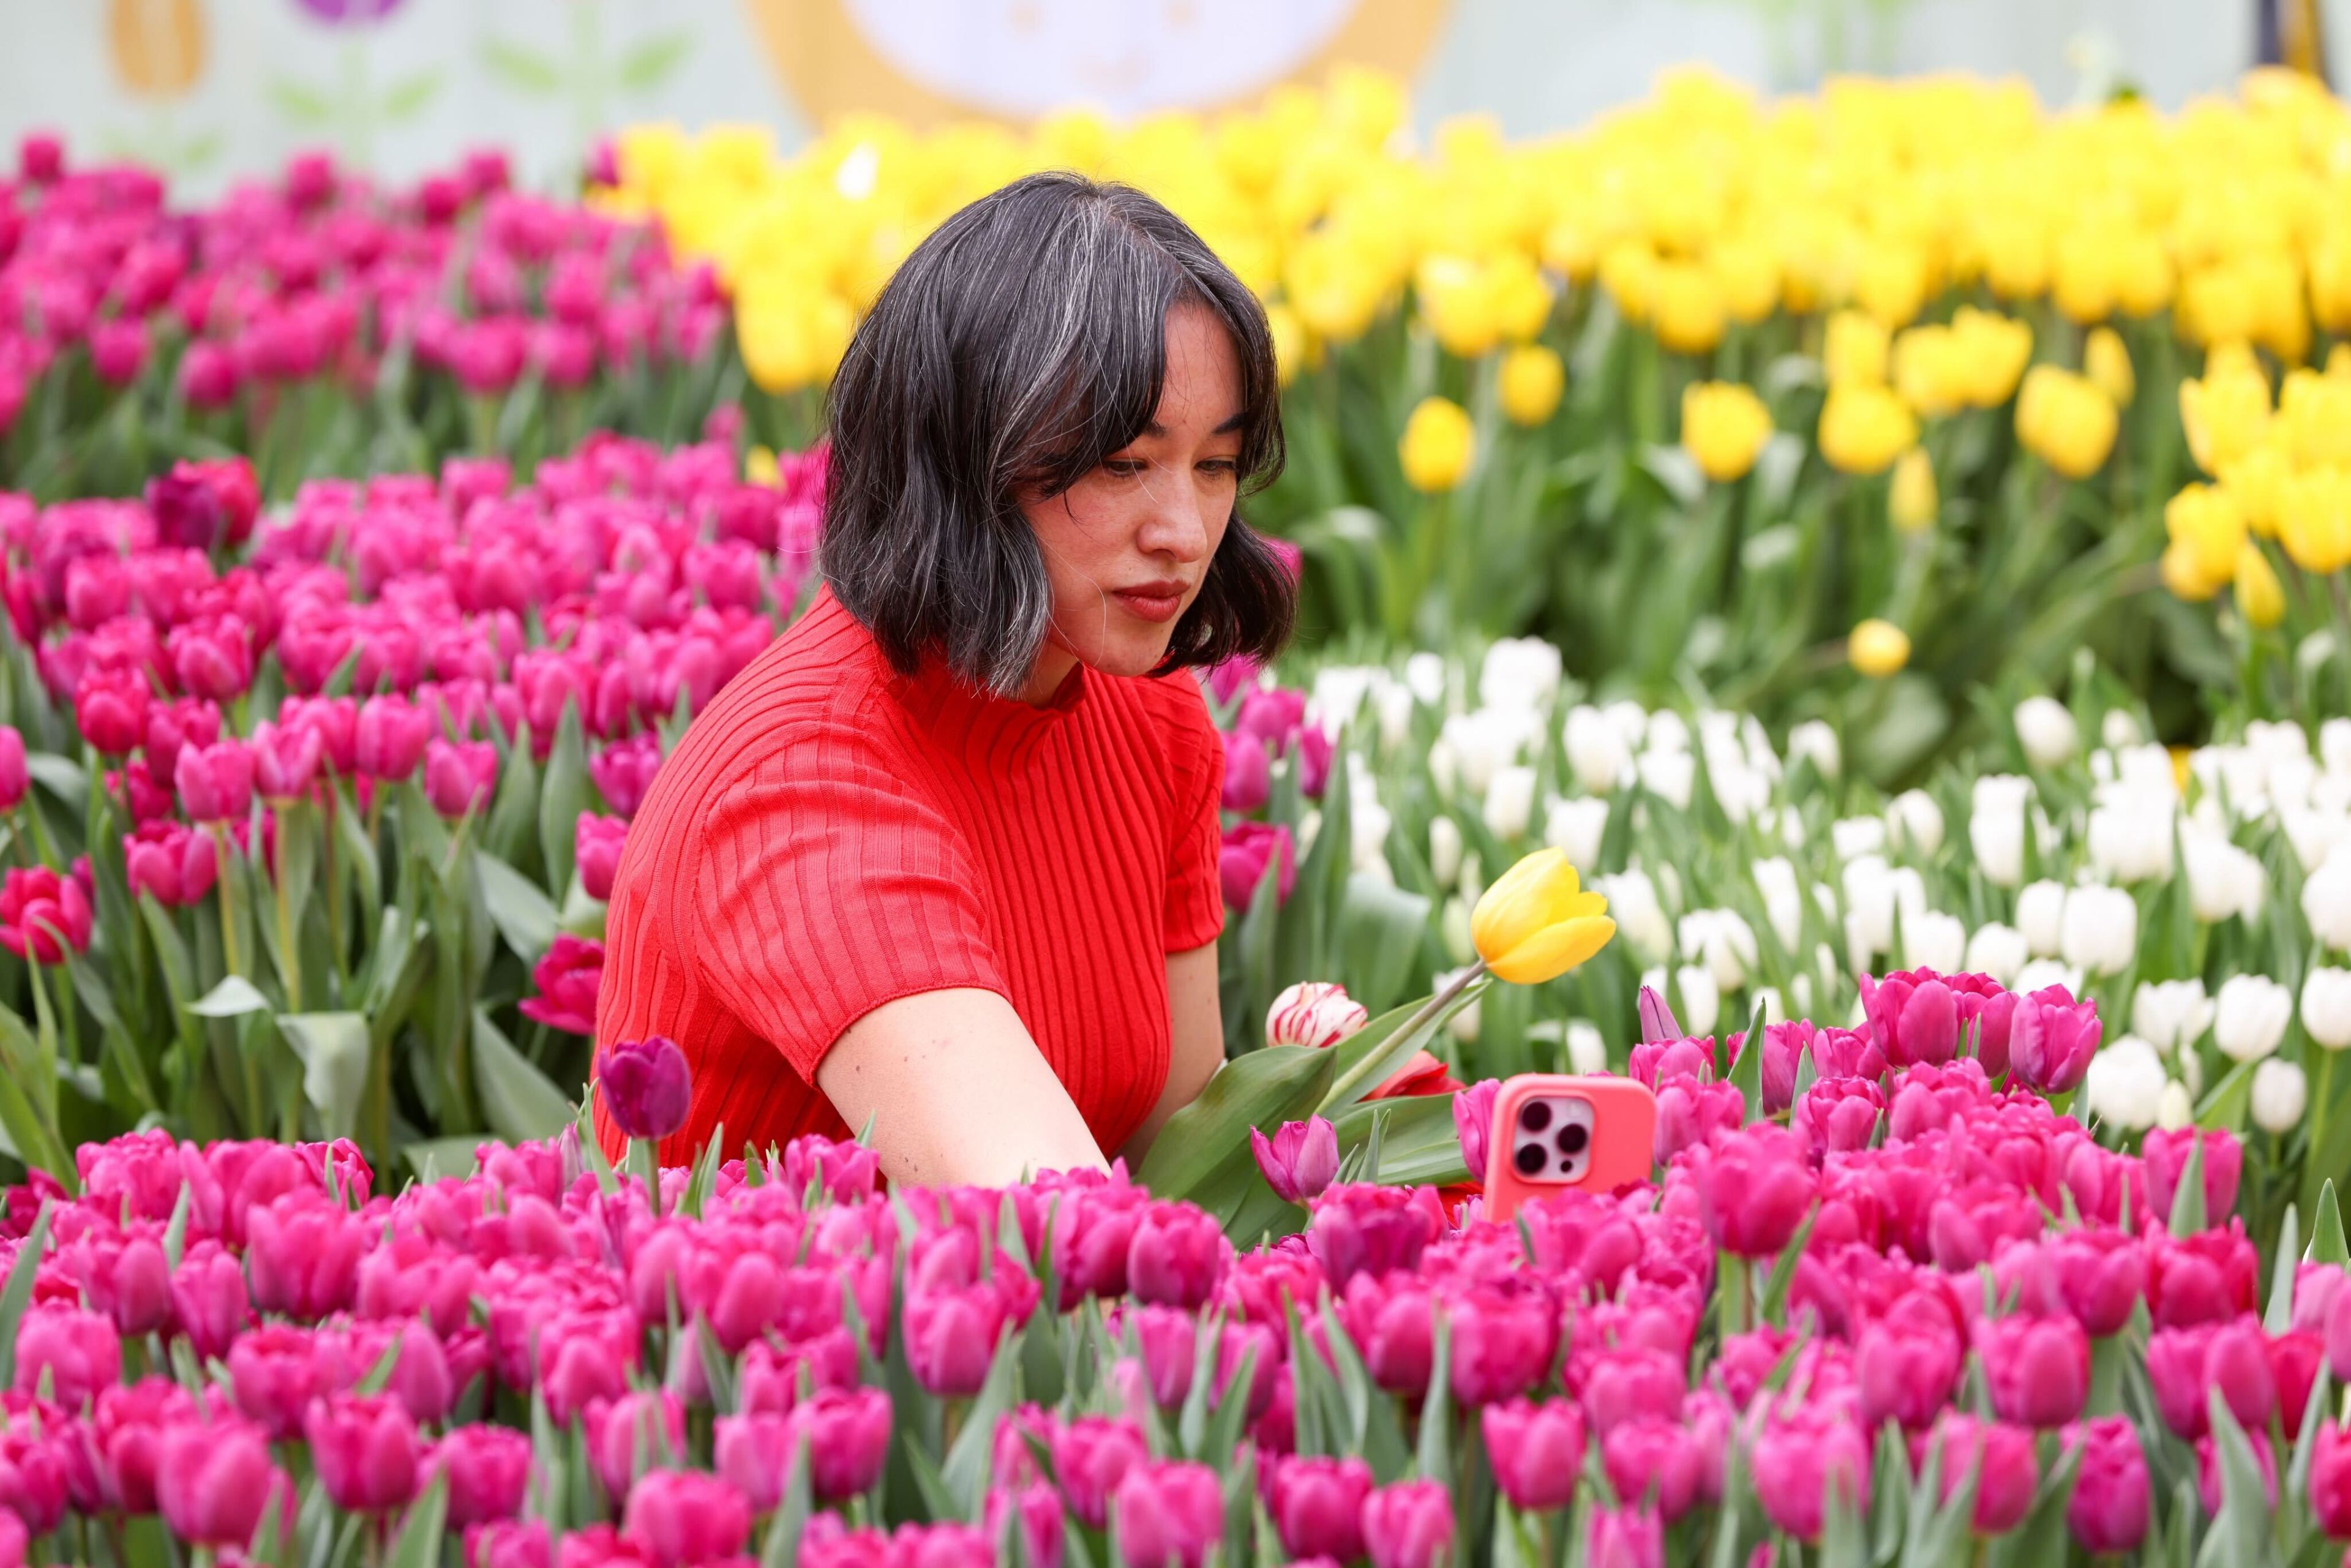 A person in a red top among vibrant tulips, using a phone to capture the scene.